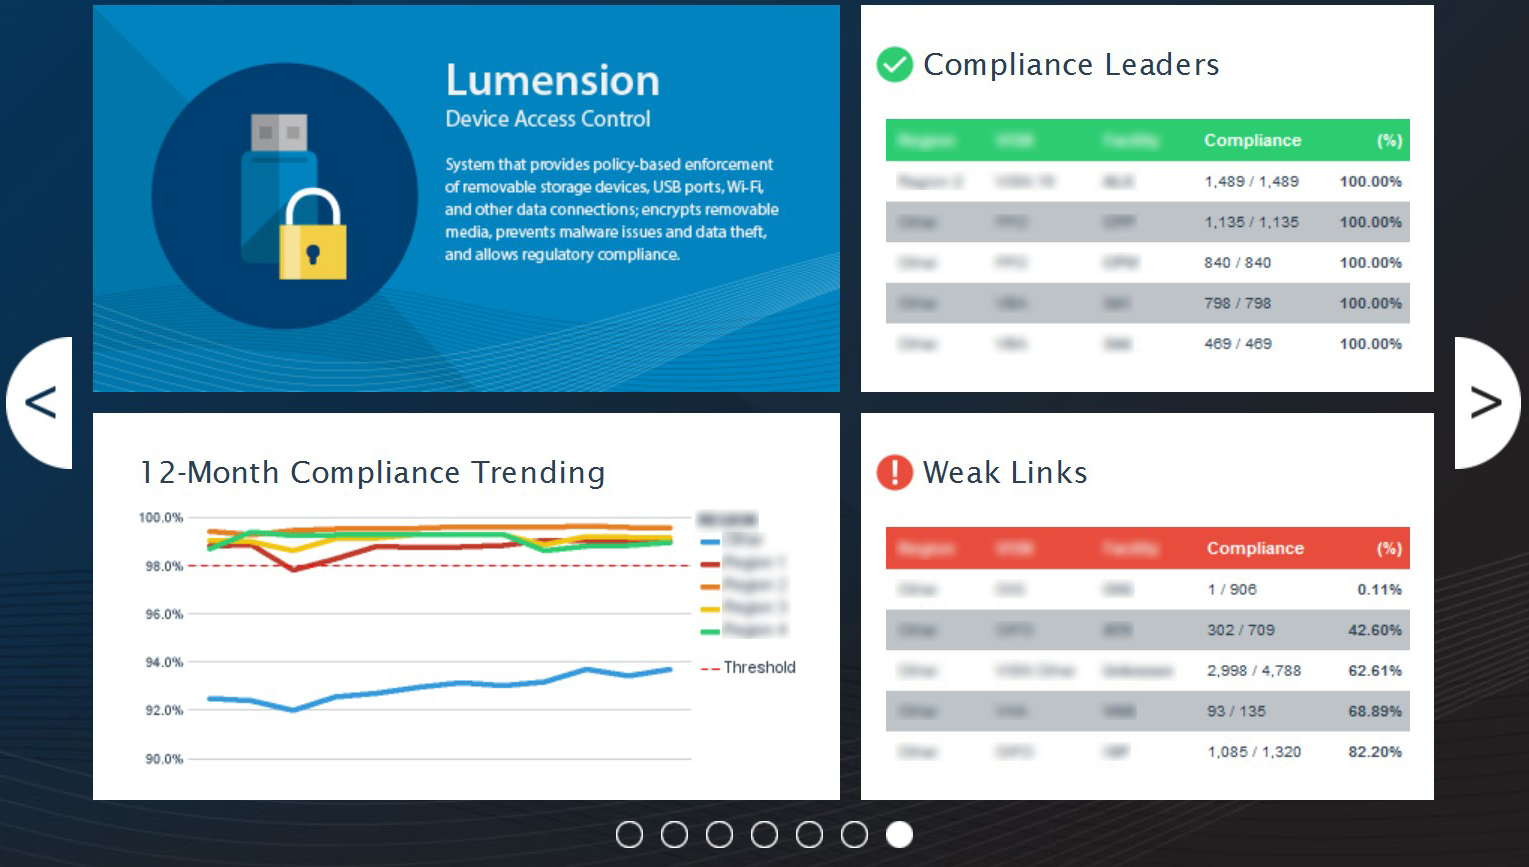 Lumension Compliance status image in carousel